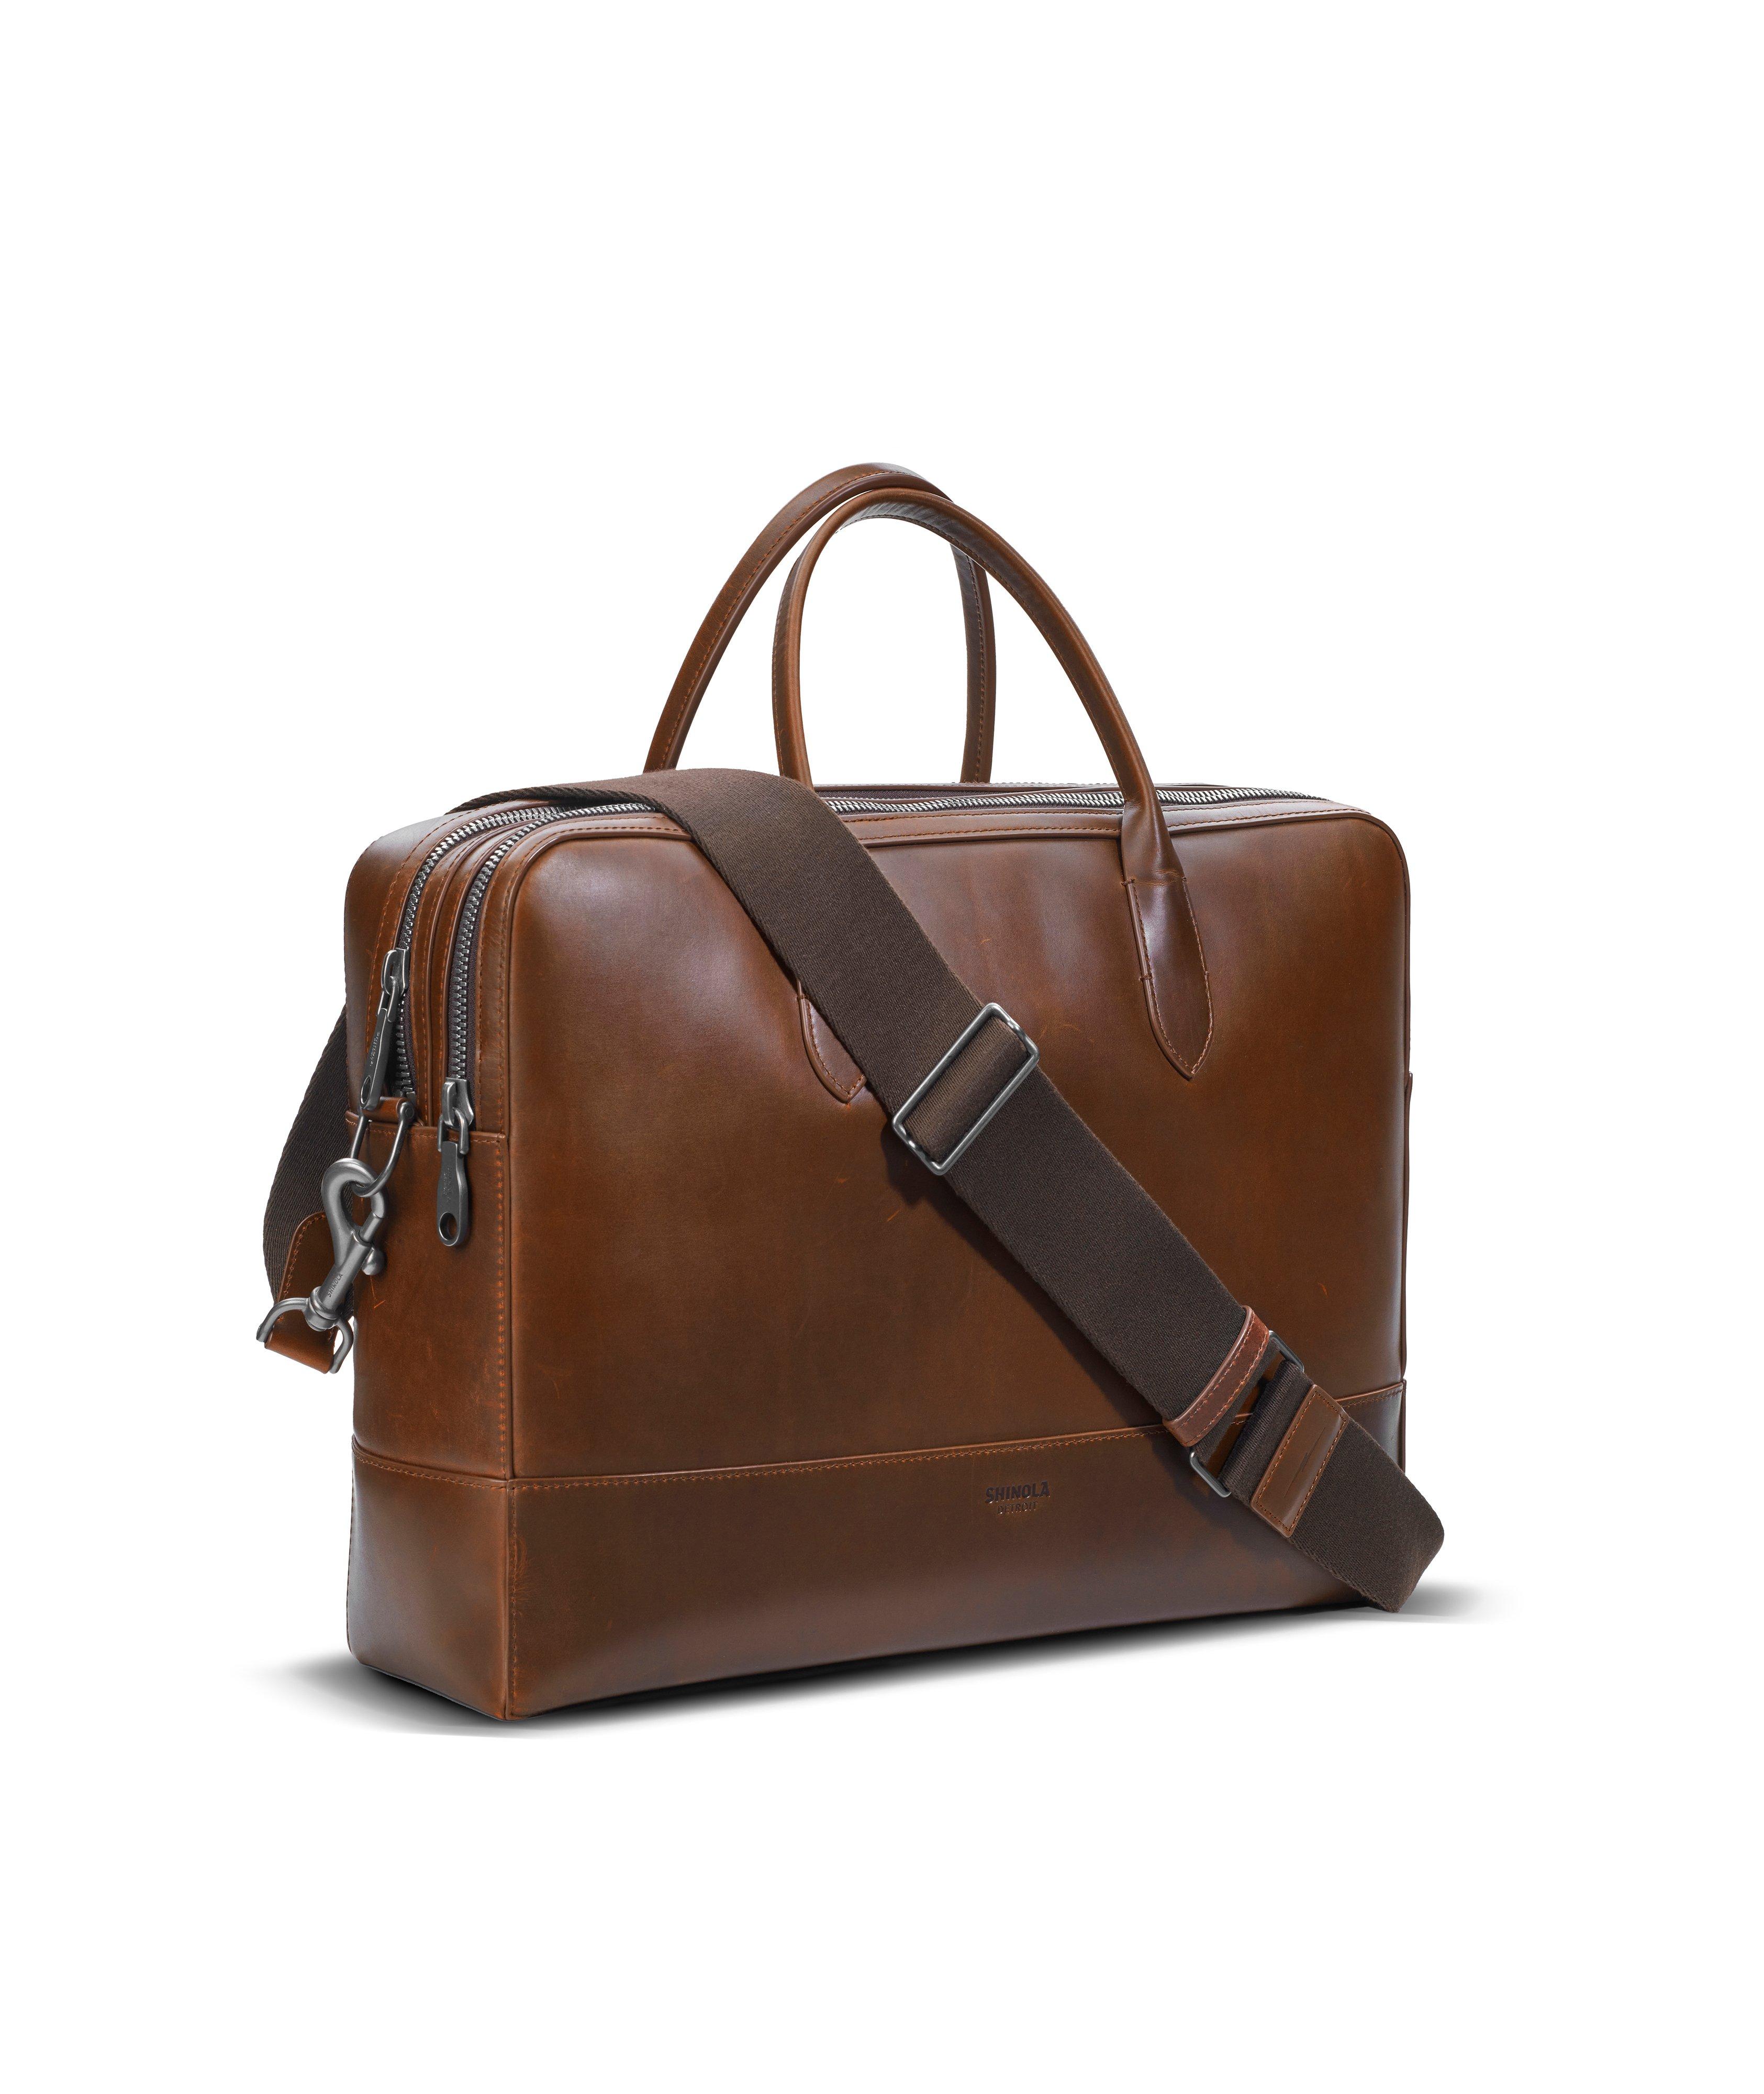 Canfield Double Zip Navigator Leather Briefcase image 1